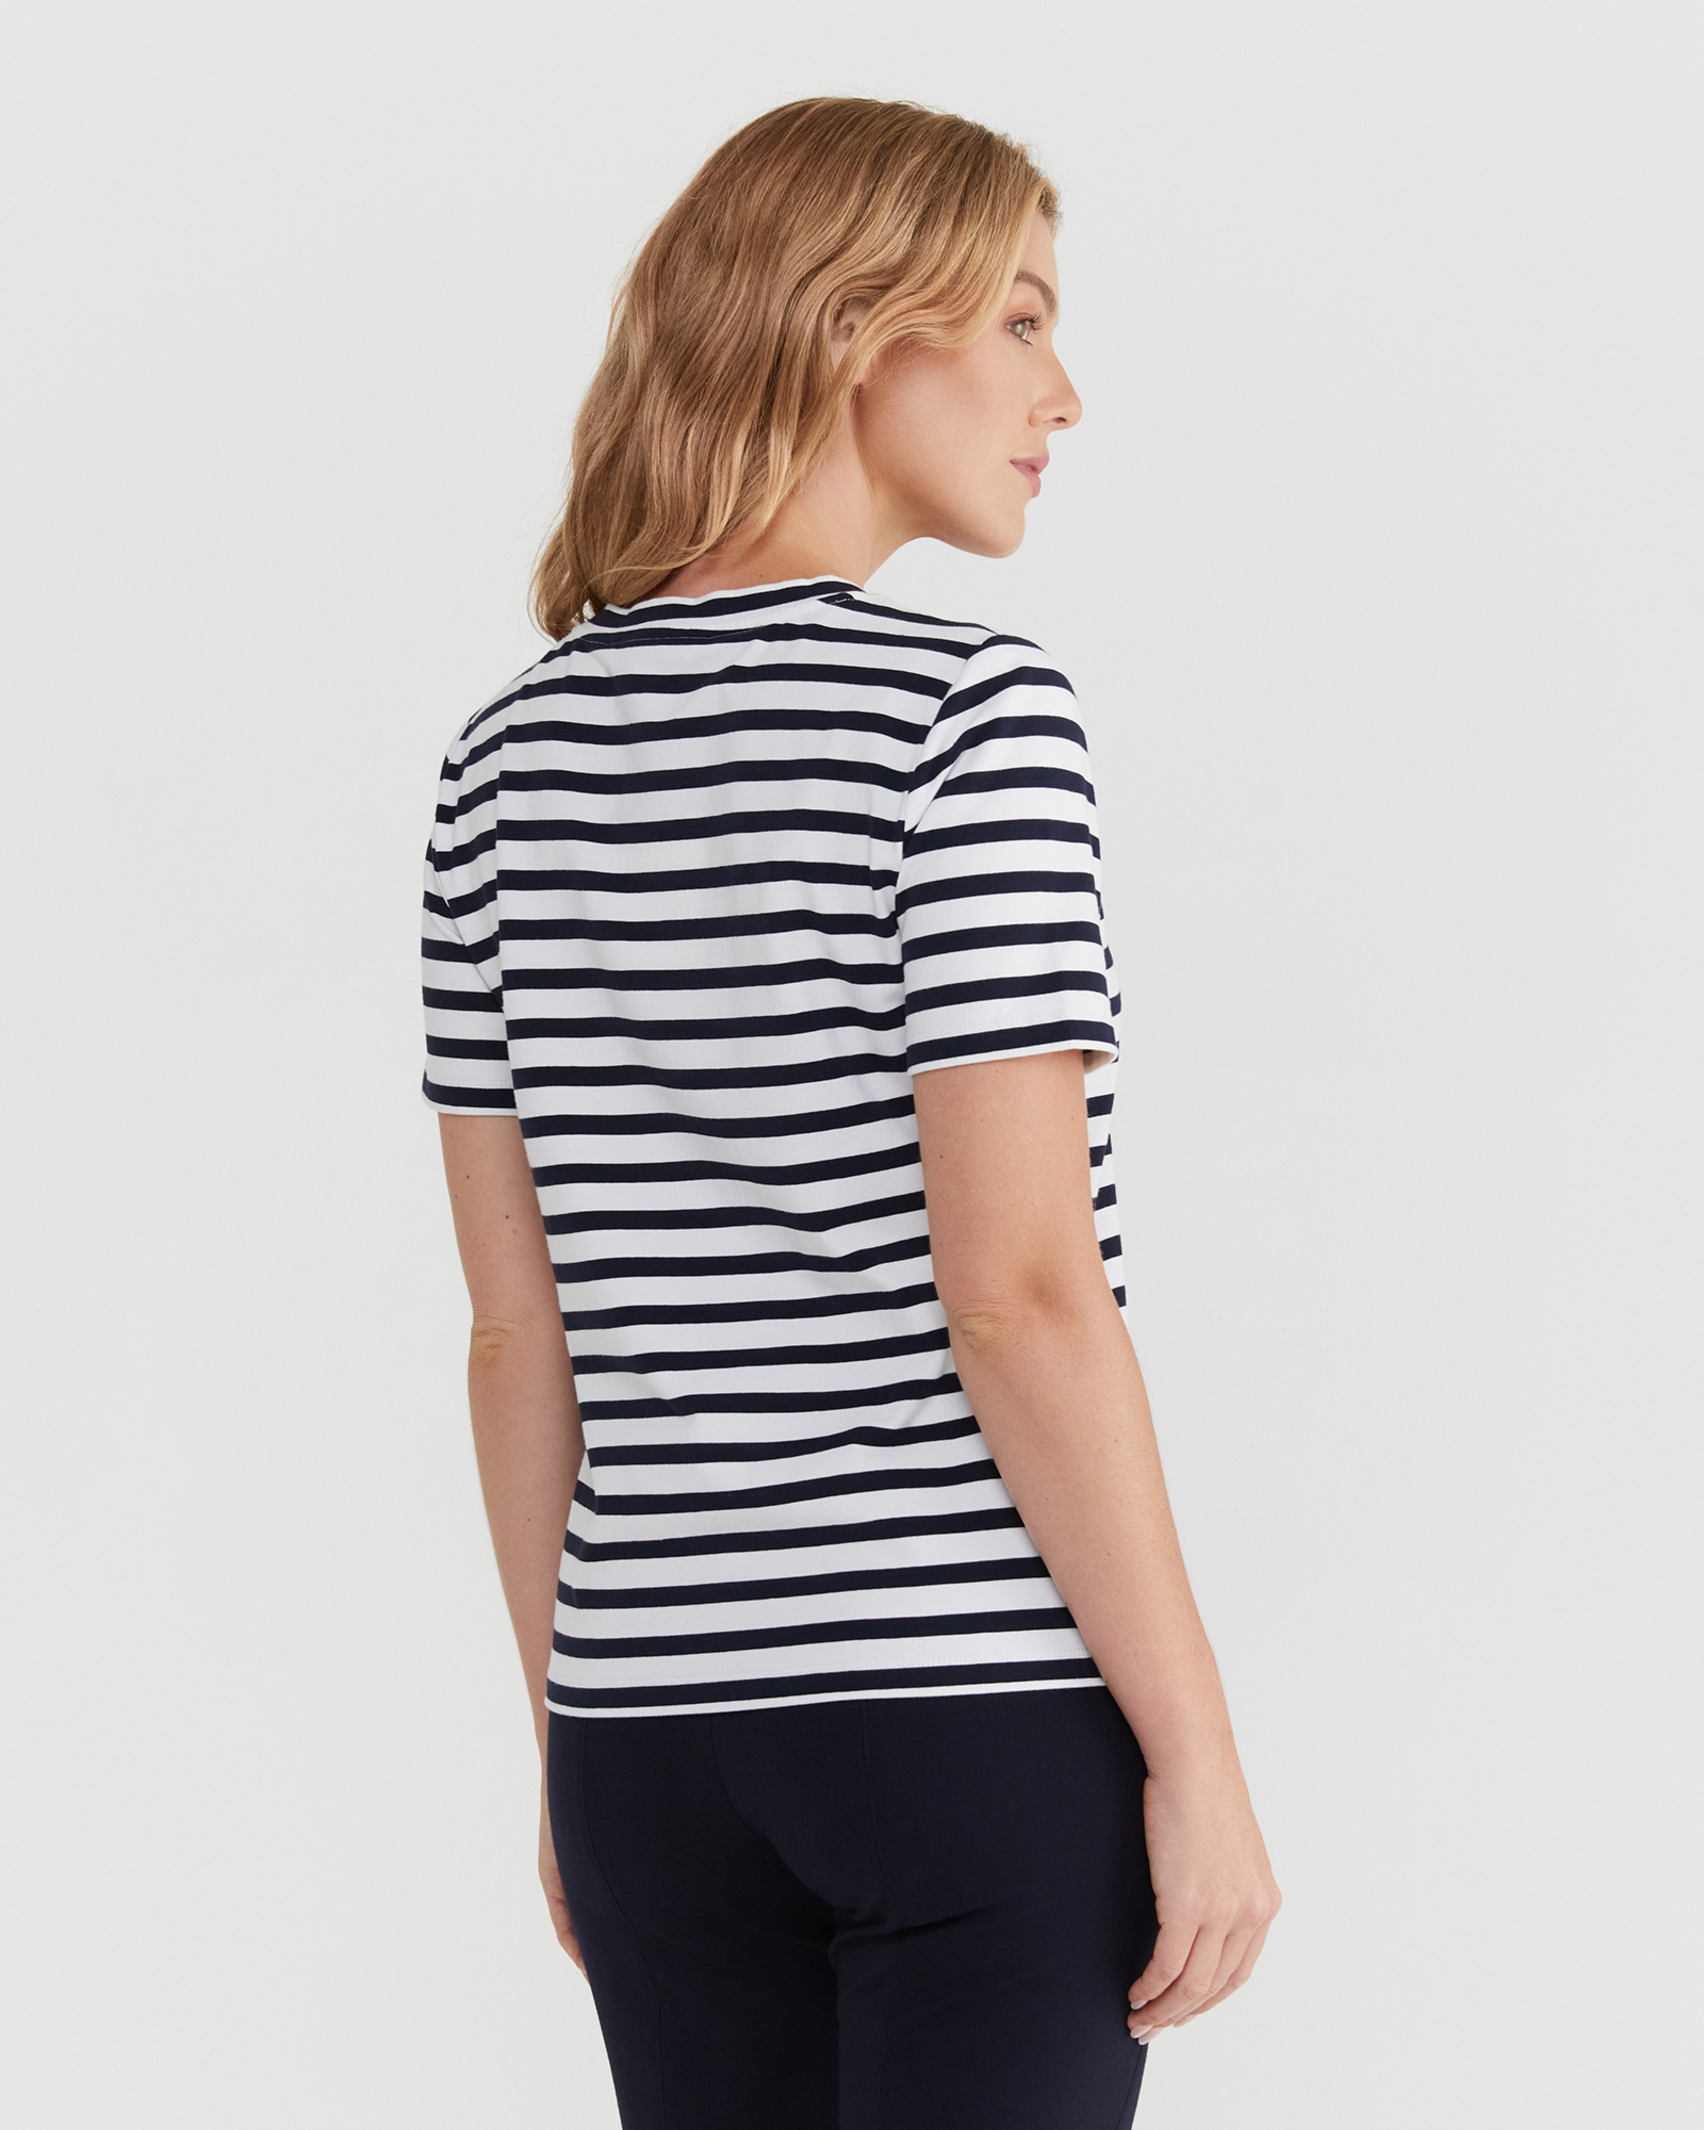 The Perfect T-Shirt in NAVY/WHITE